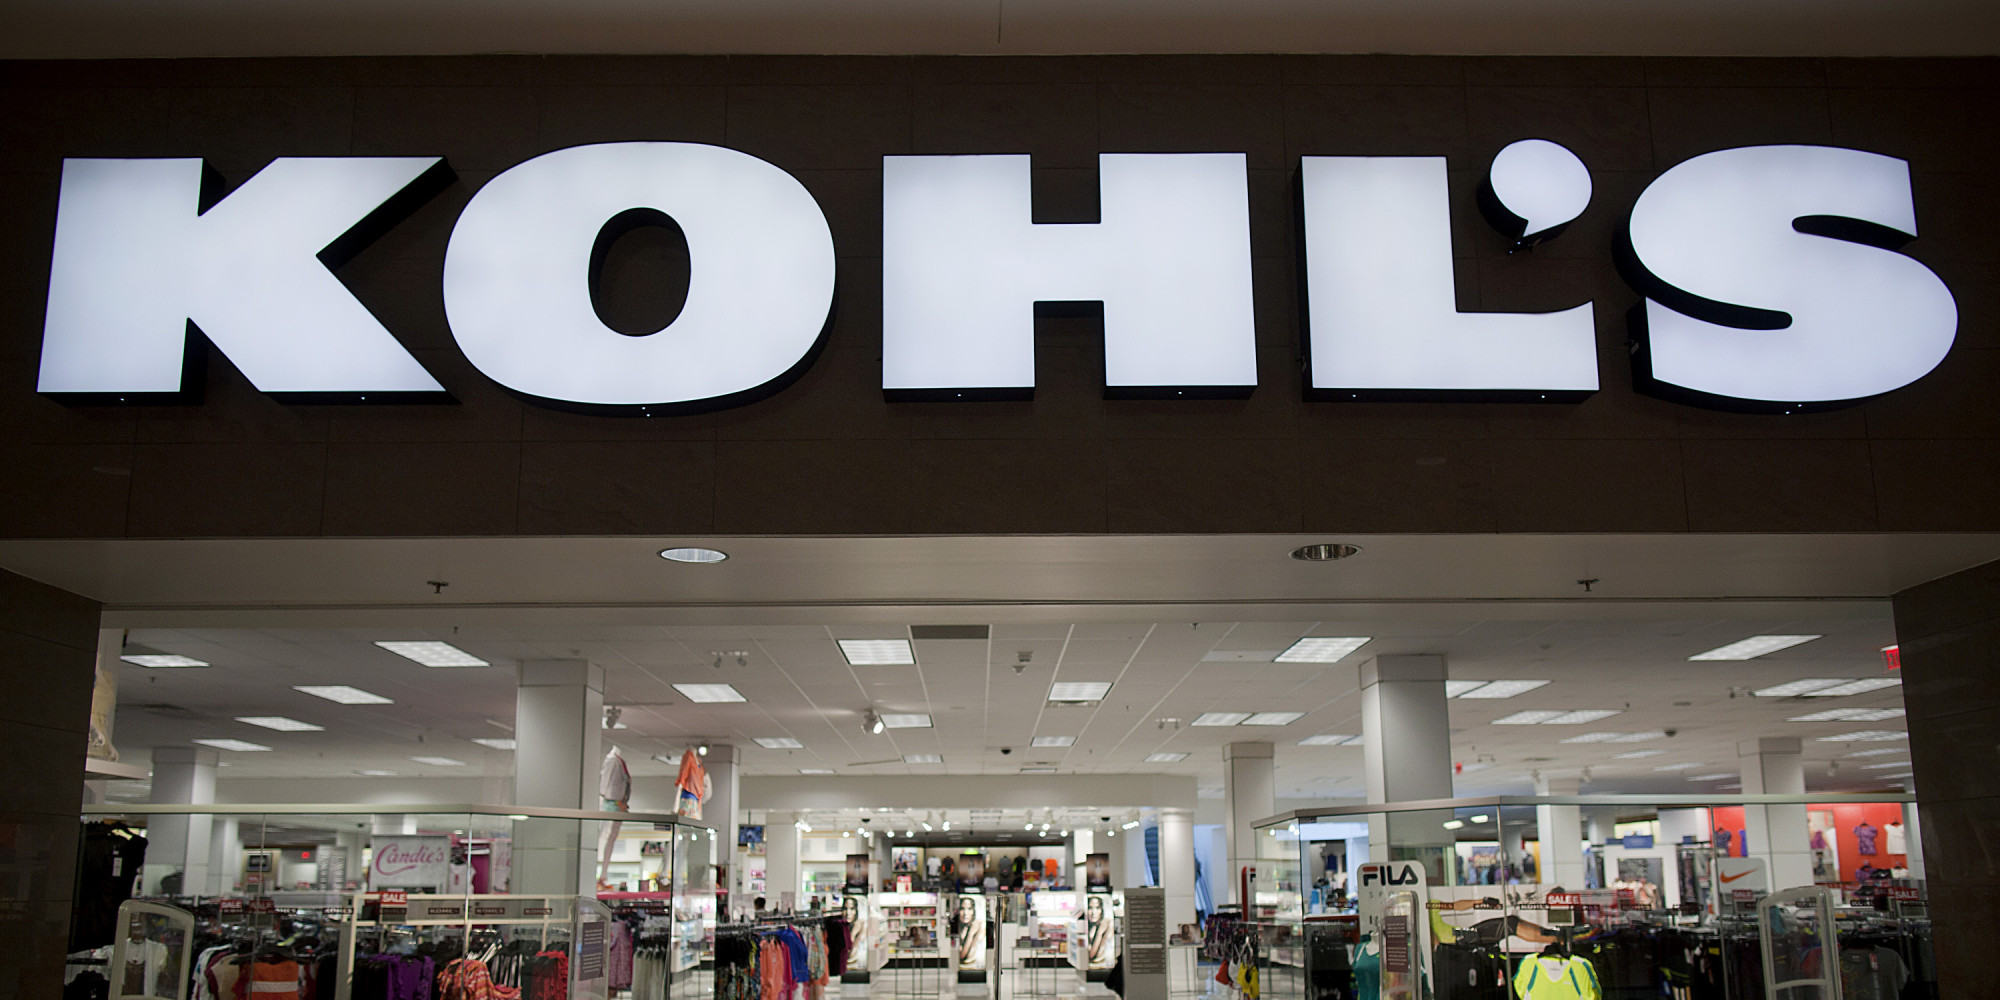 Kohl's Black Friday 2013 Sales Seem Too Good To Be True | HuffPost